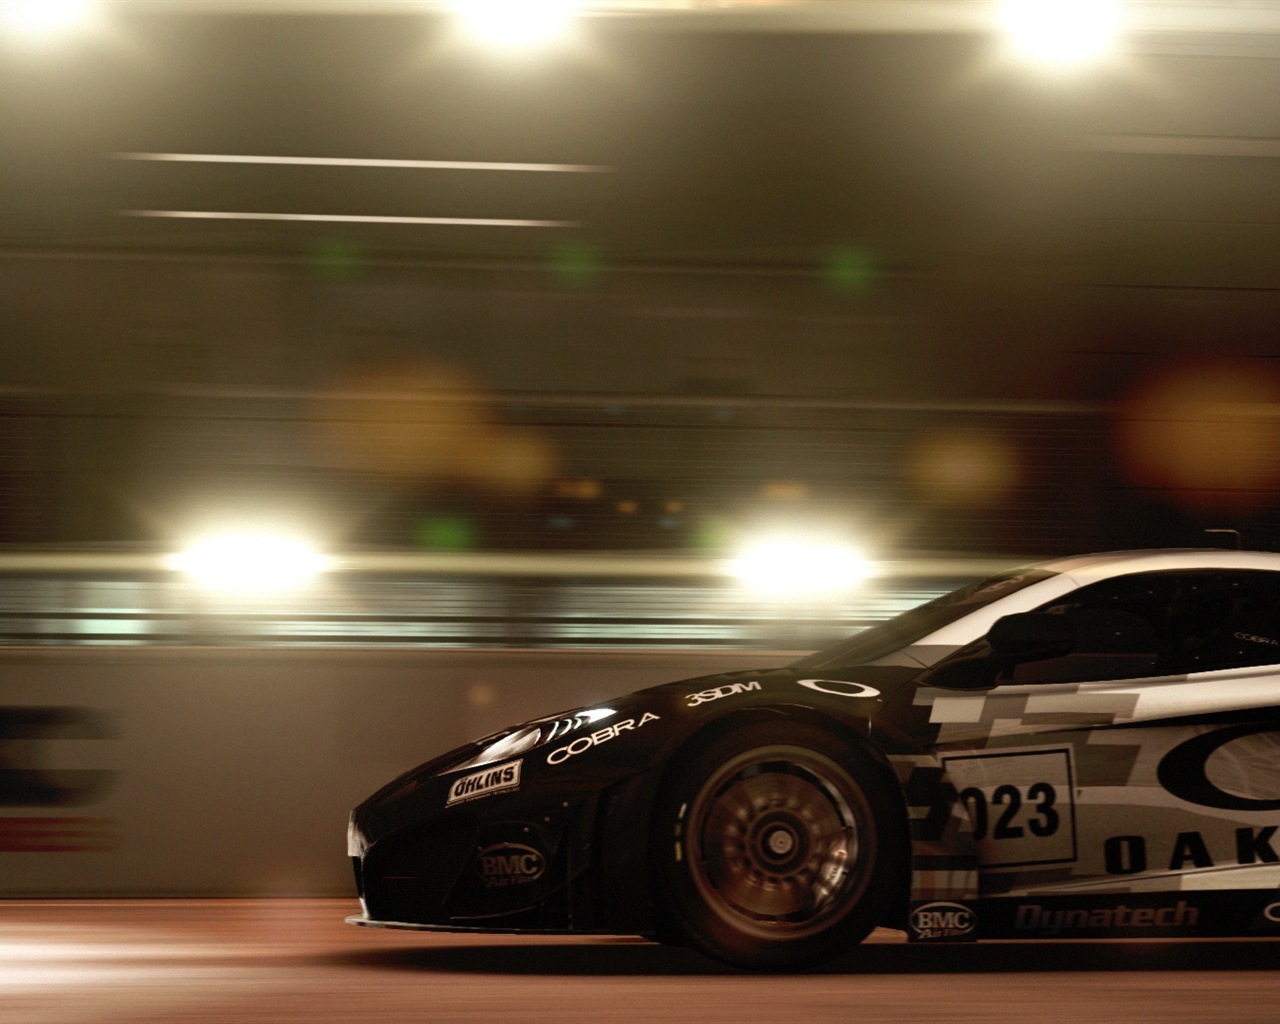 GRID: Autosport HD game wallpapers #4 - 1280x1024